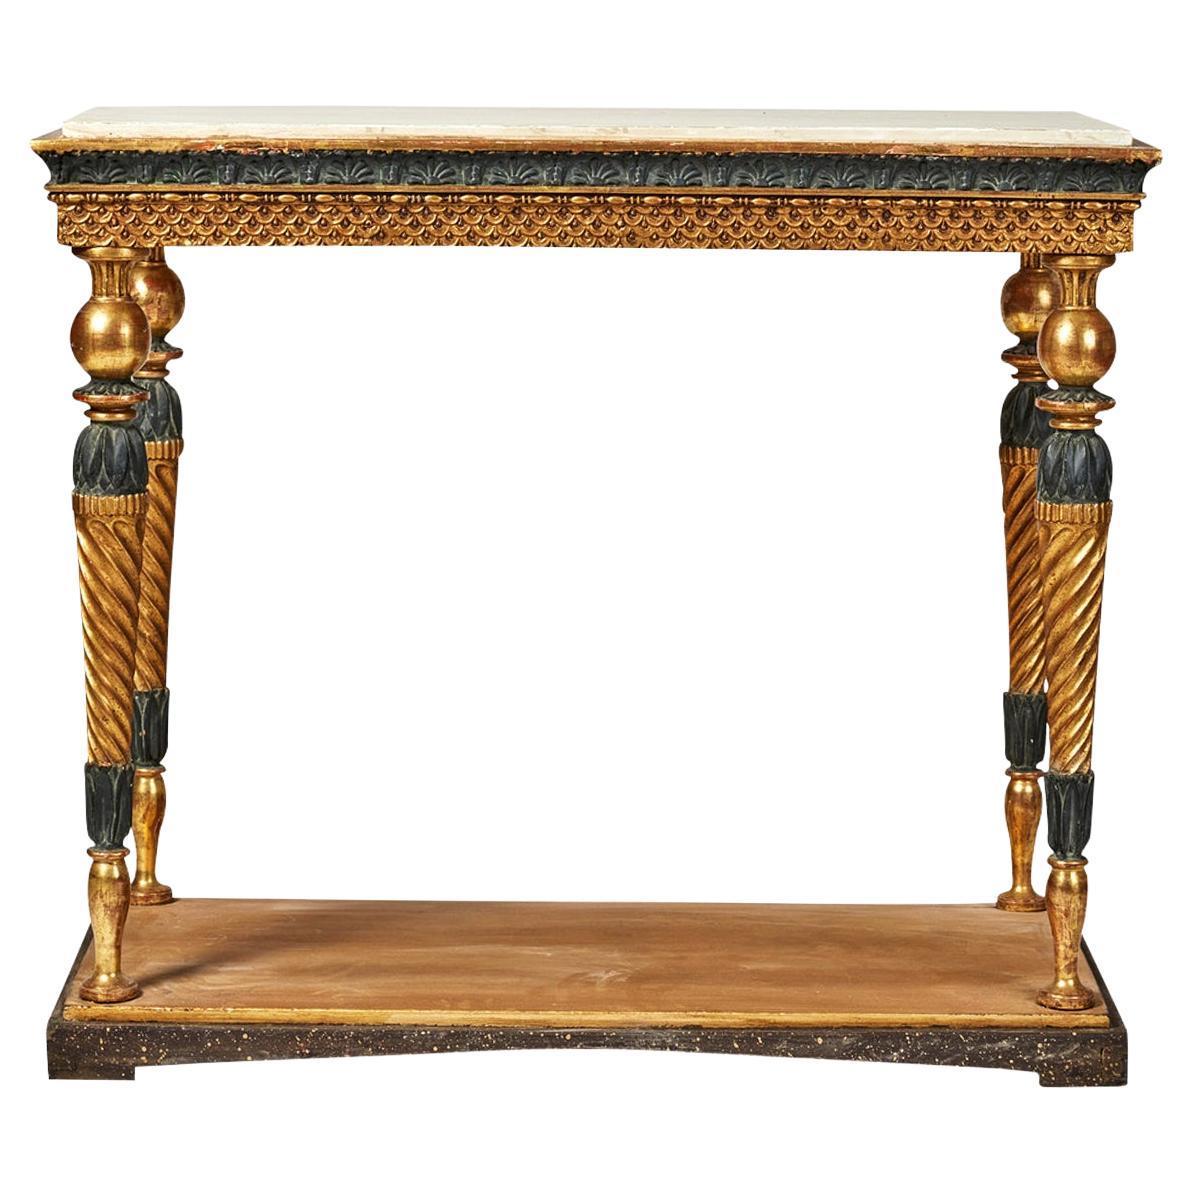 19th Century Swedish Gustavian Gilded Pinewood Console Table by Jonas Frisk For Sale